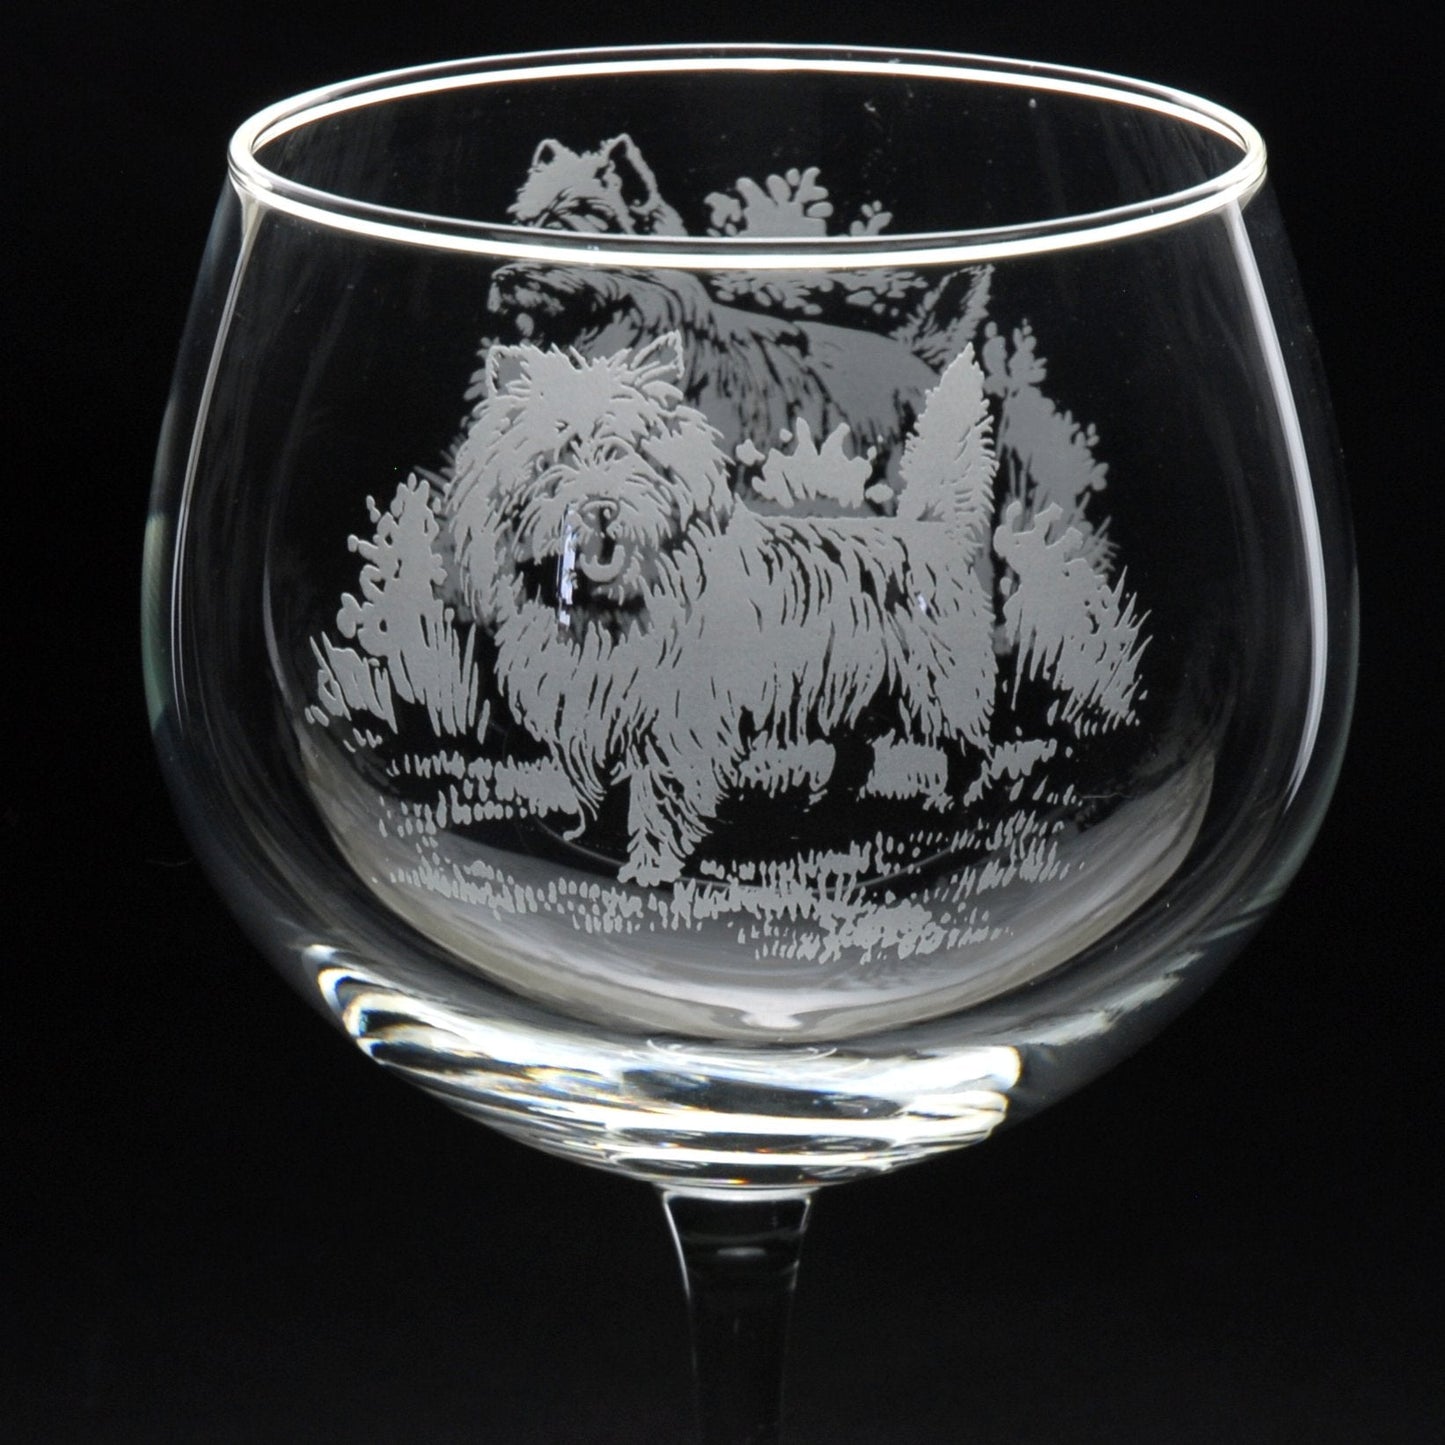 Cairn Terrier Dog Gin Cocktail Glass - Hand Etched/Engraved Gift